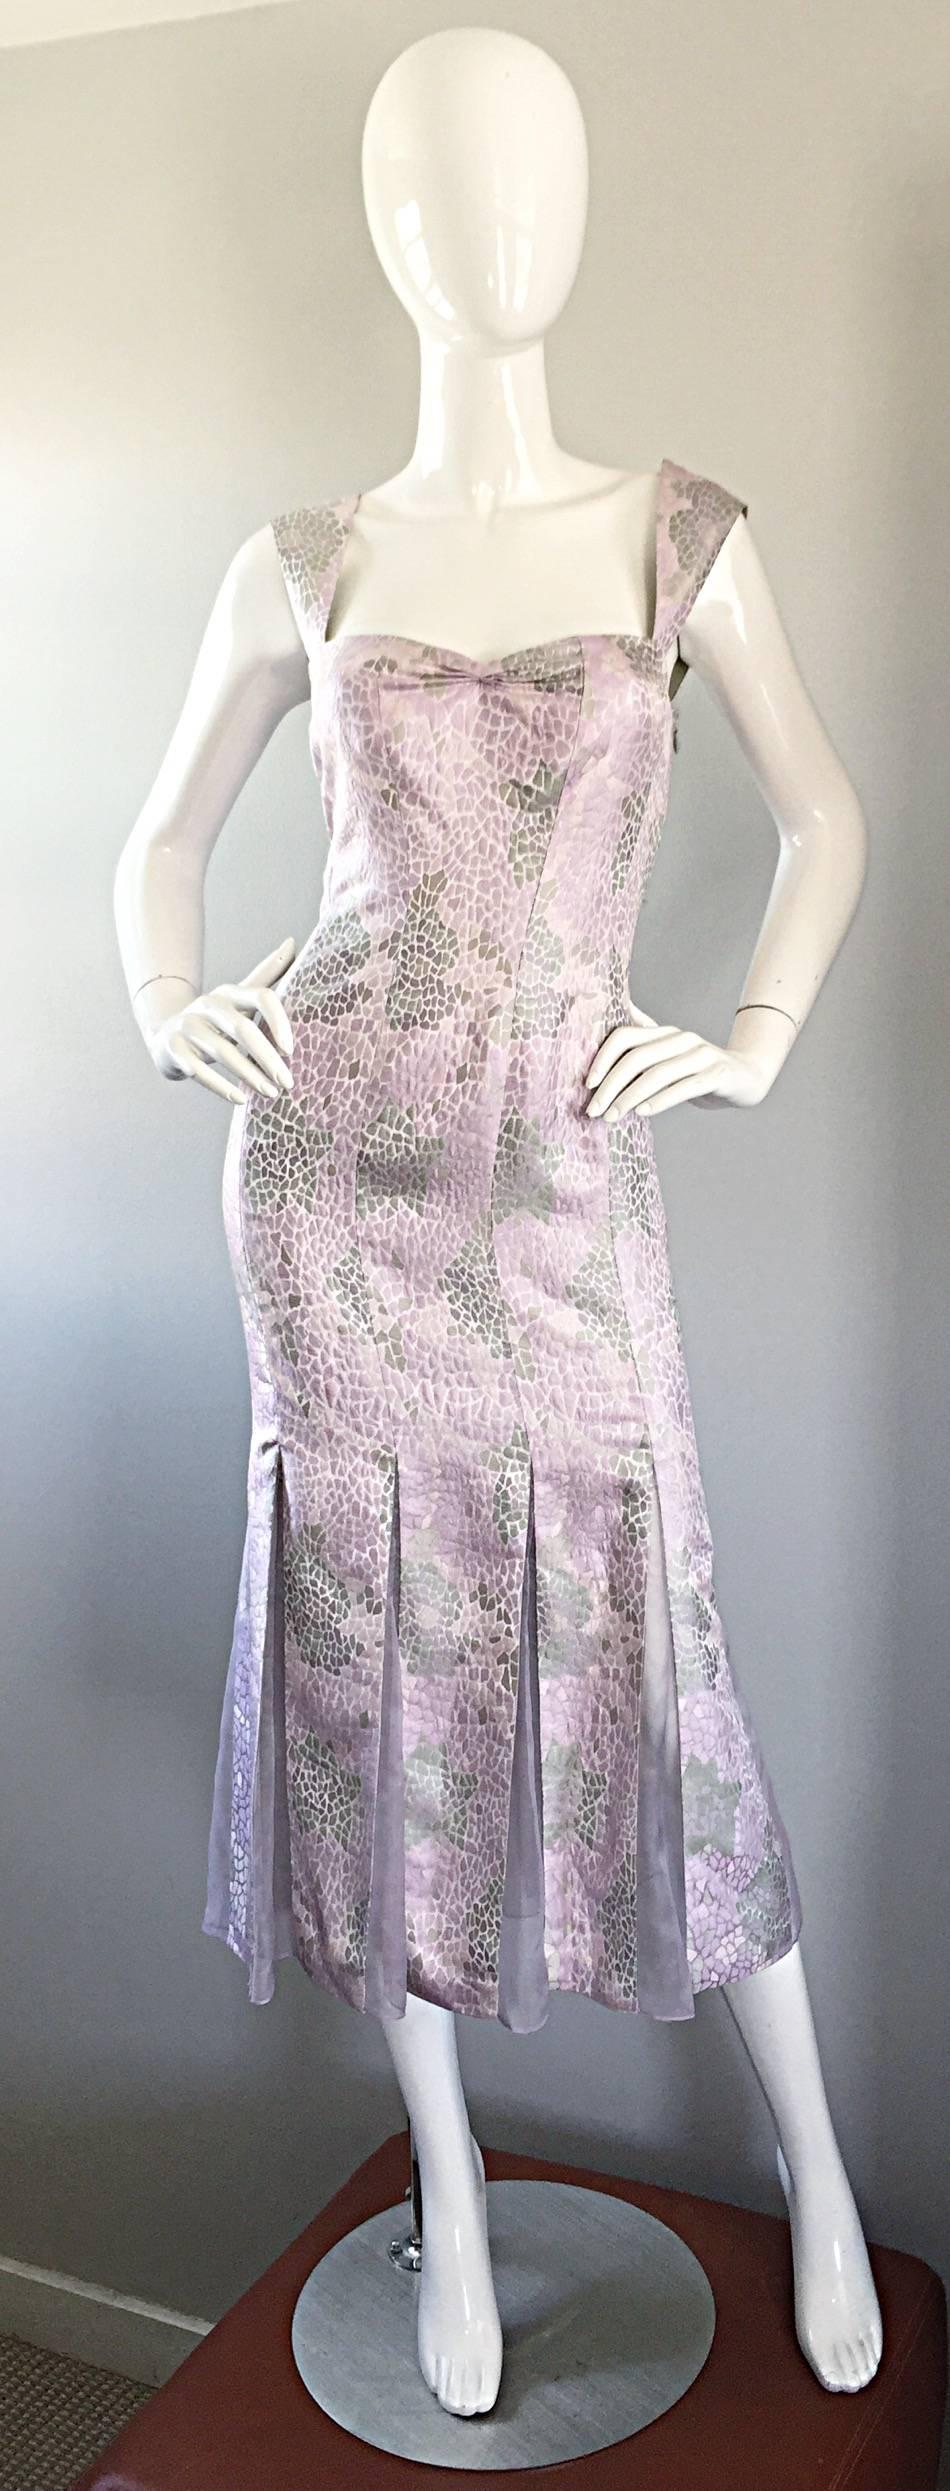 Gorgeous LILY SAMII silk dress with Carwash hem! Features a beautiful metallic alligator print in pink, gray and purple. Wonderful fitted bodice, with a Carwash hem mixed with semi sheer lilac chiffon. Couture quality with an expert eye to